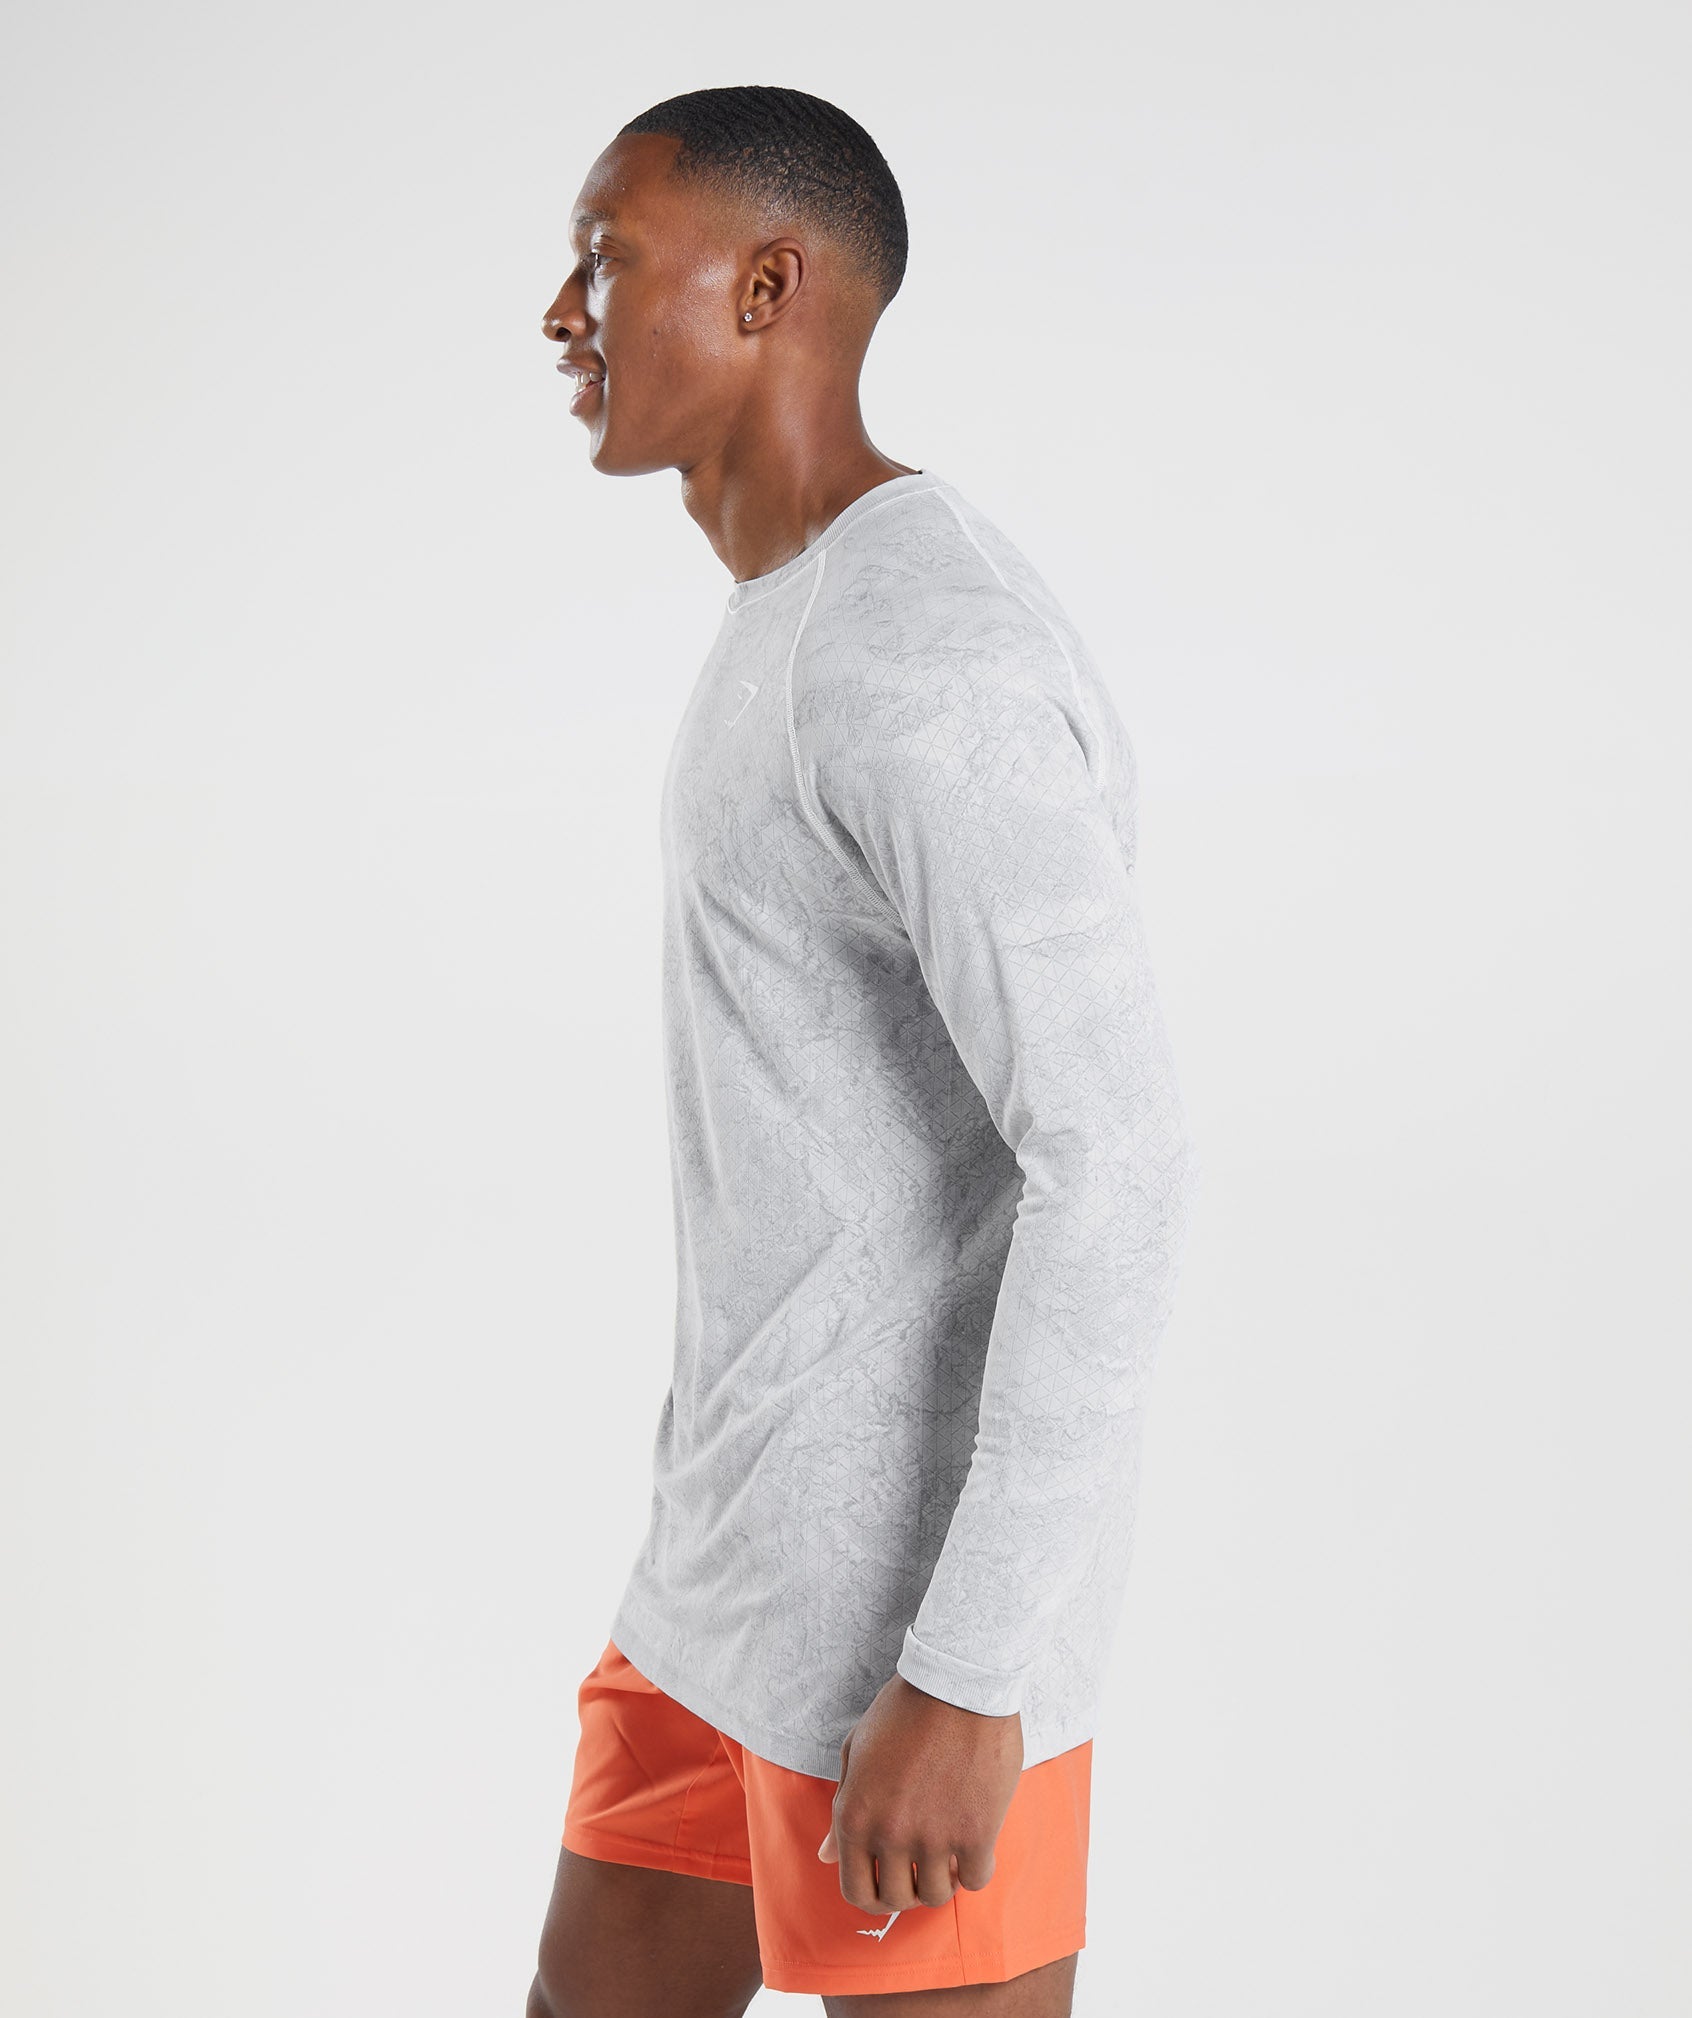 Geo Seamless Long Sleeve T-Shirt in White/Light Grey - view 3